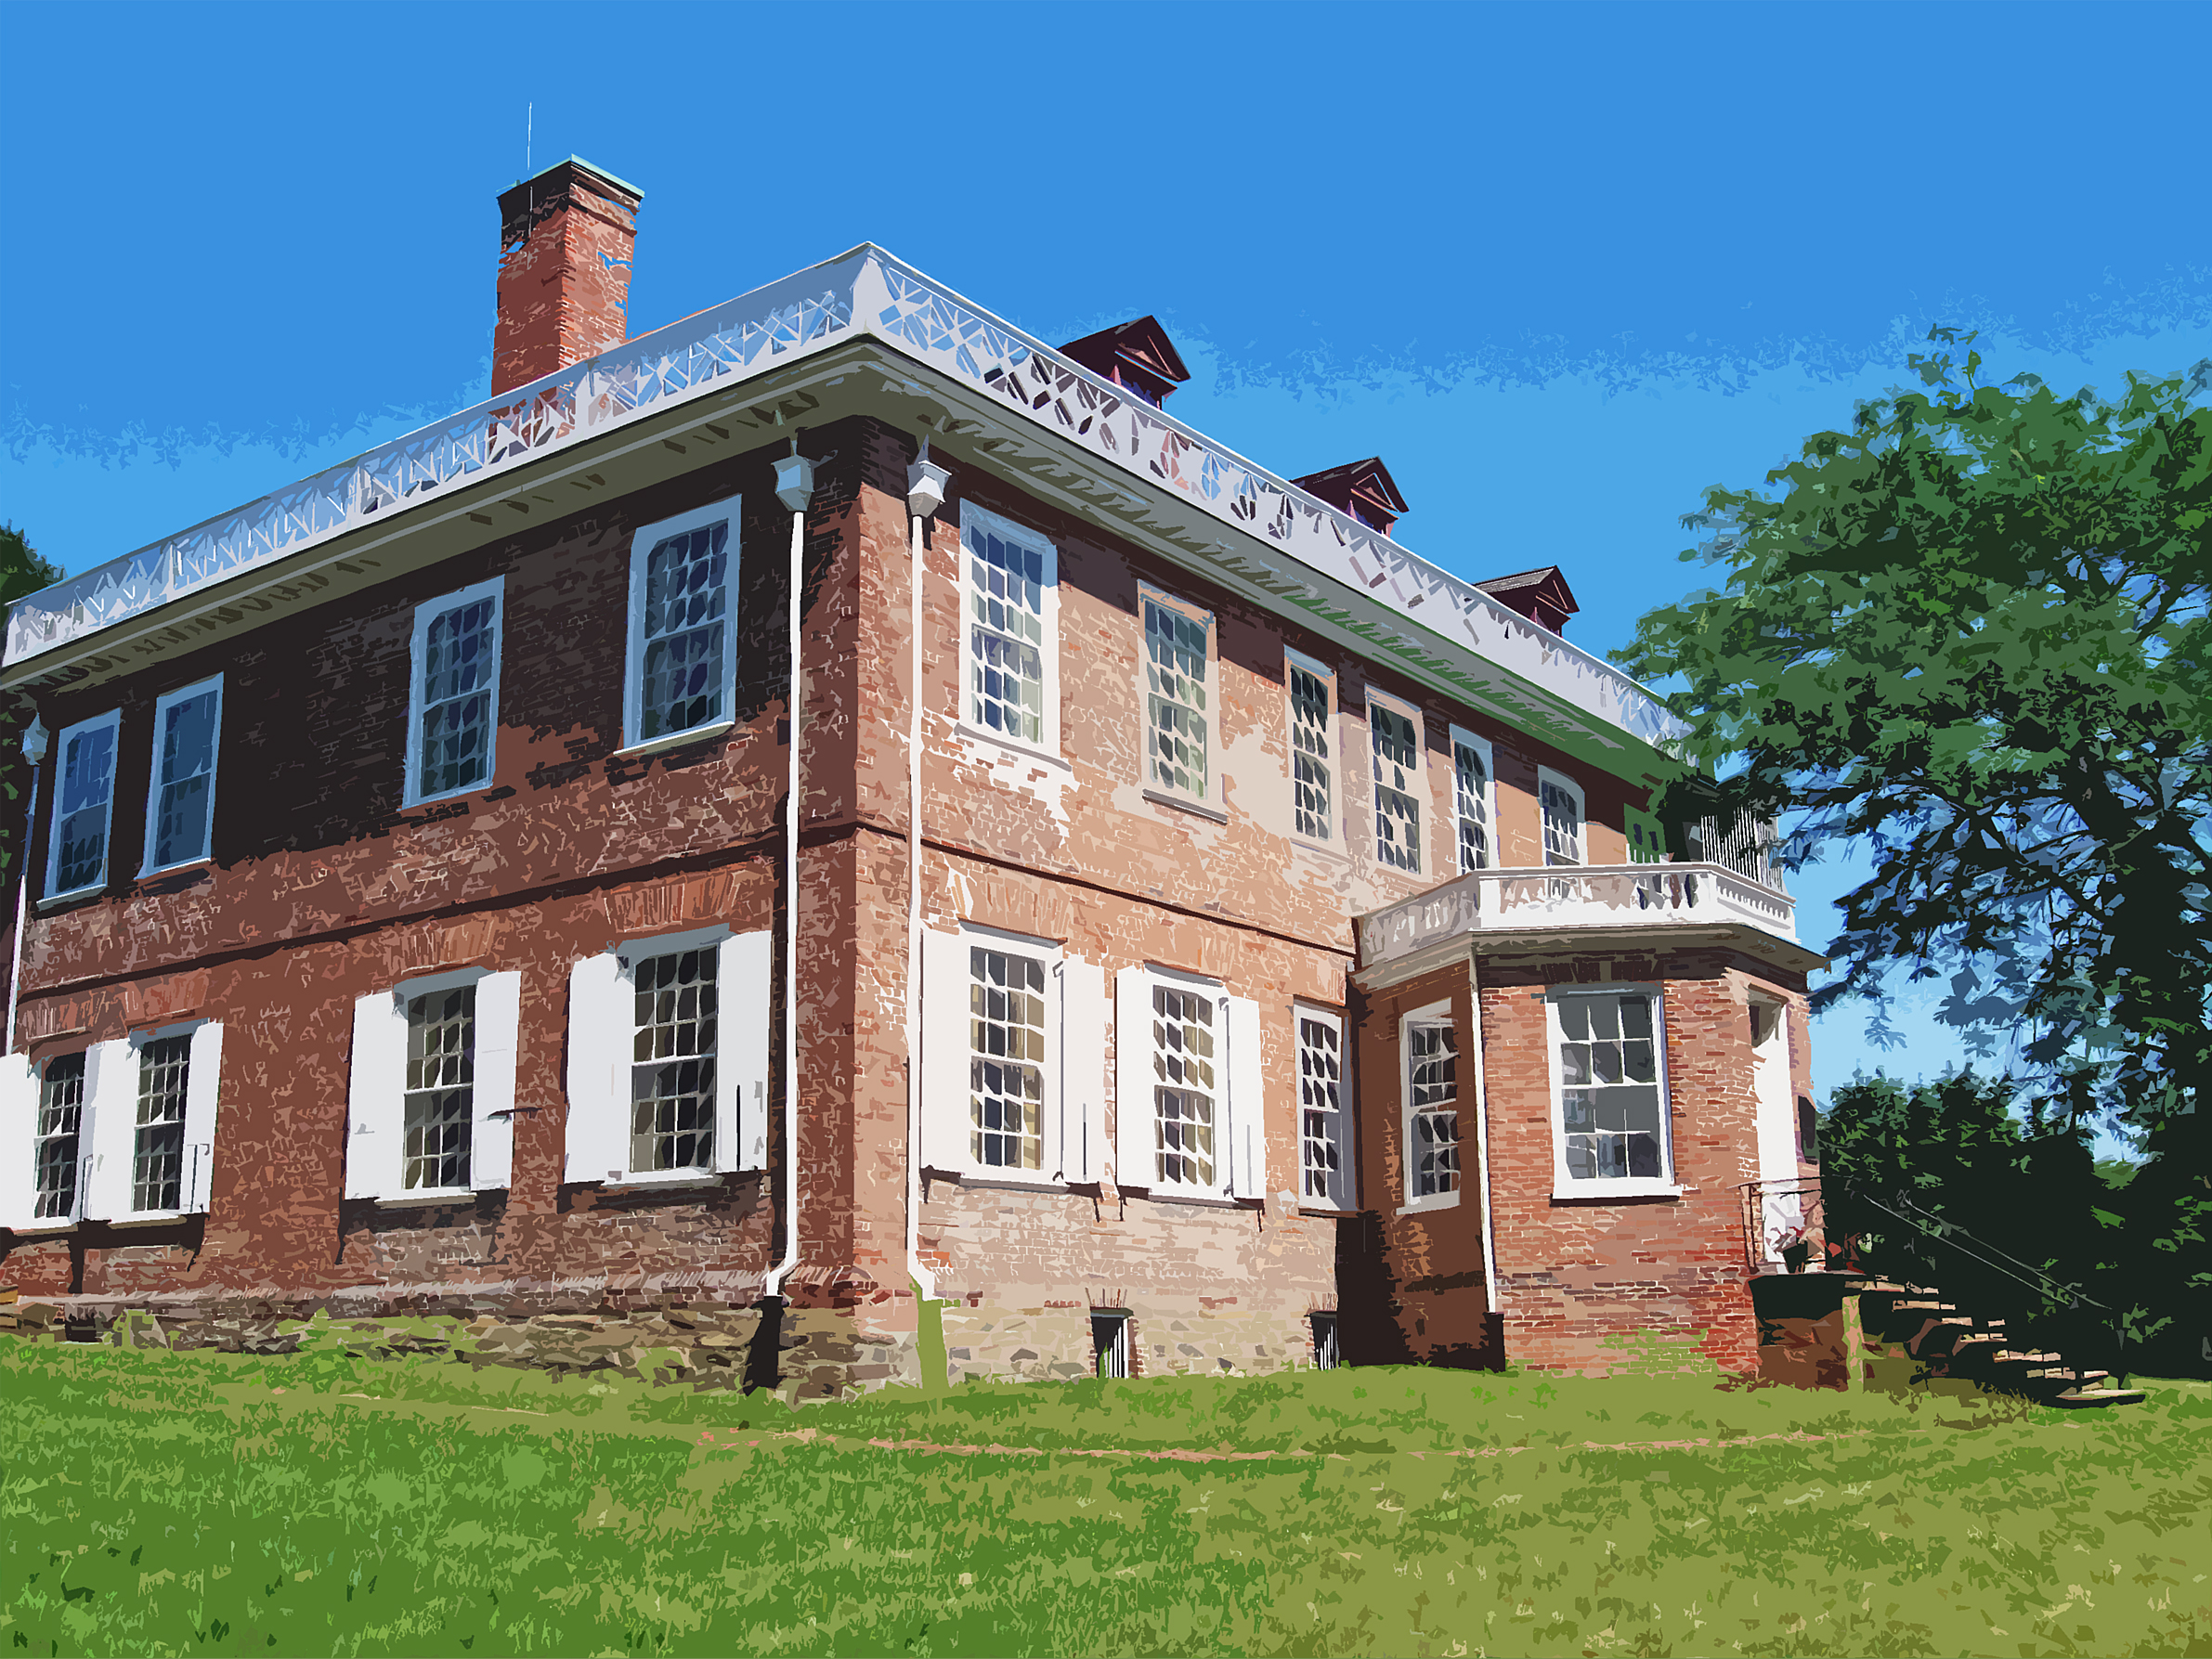 Picture of a place: Schuyler Mansion State Historic Site